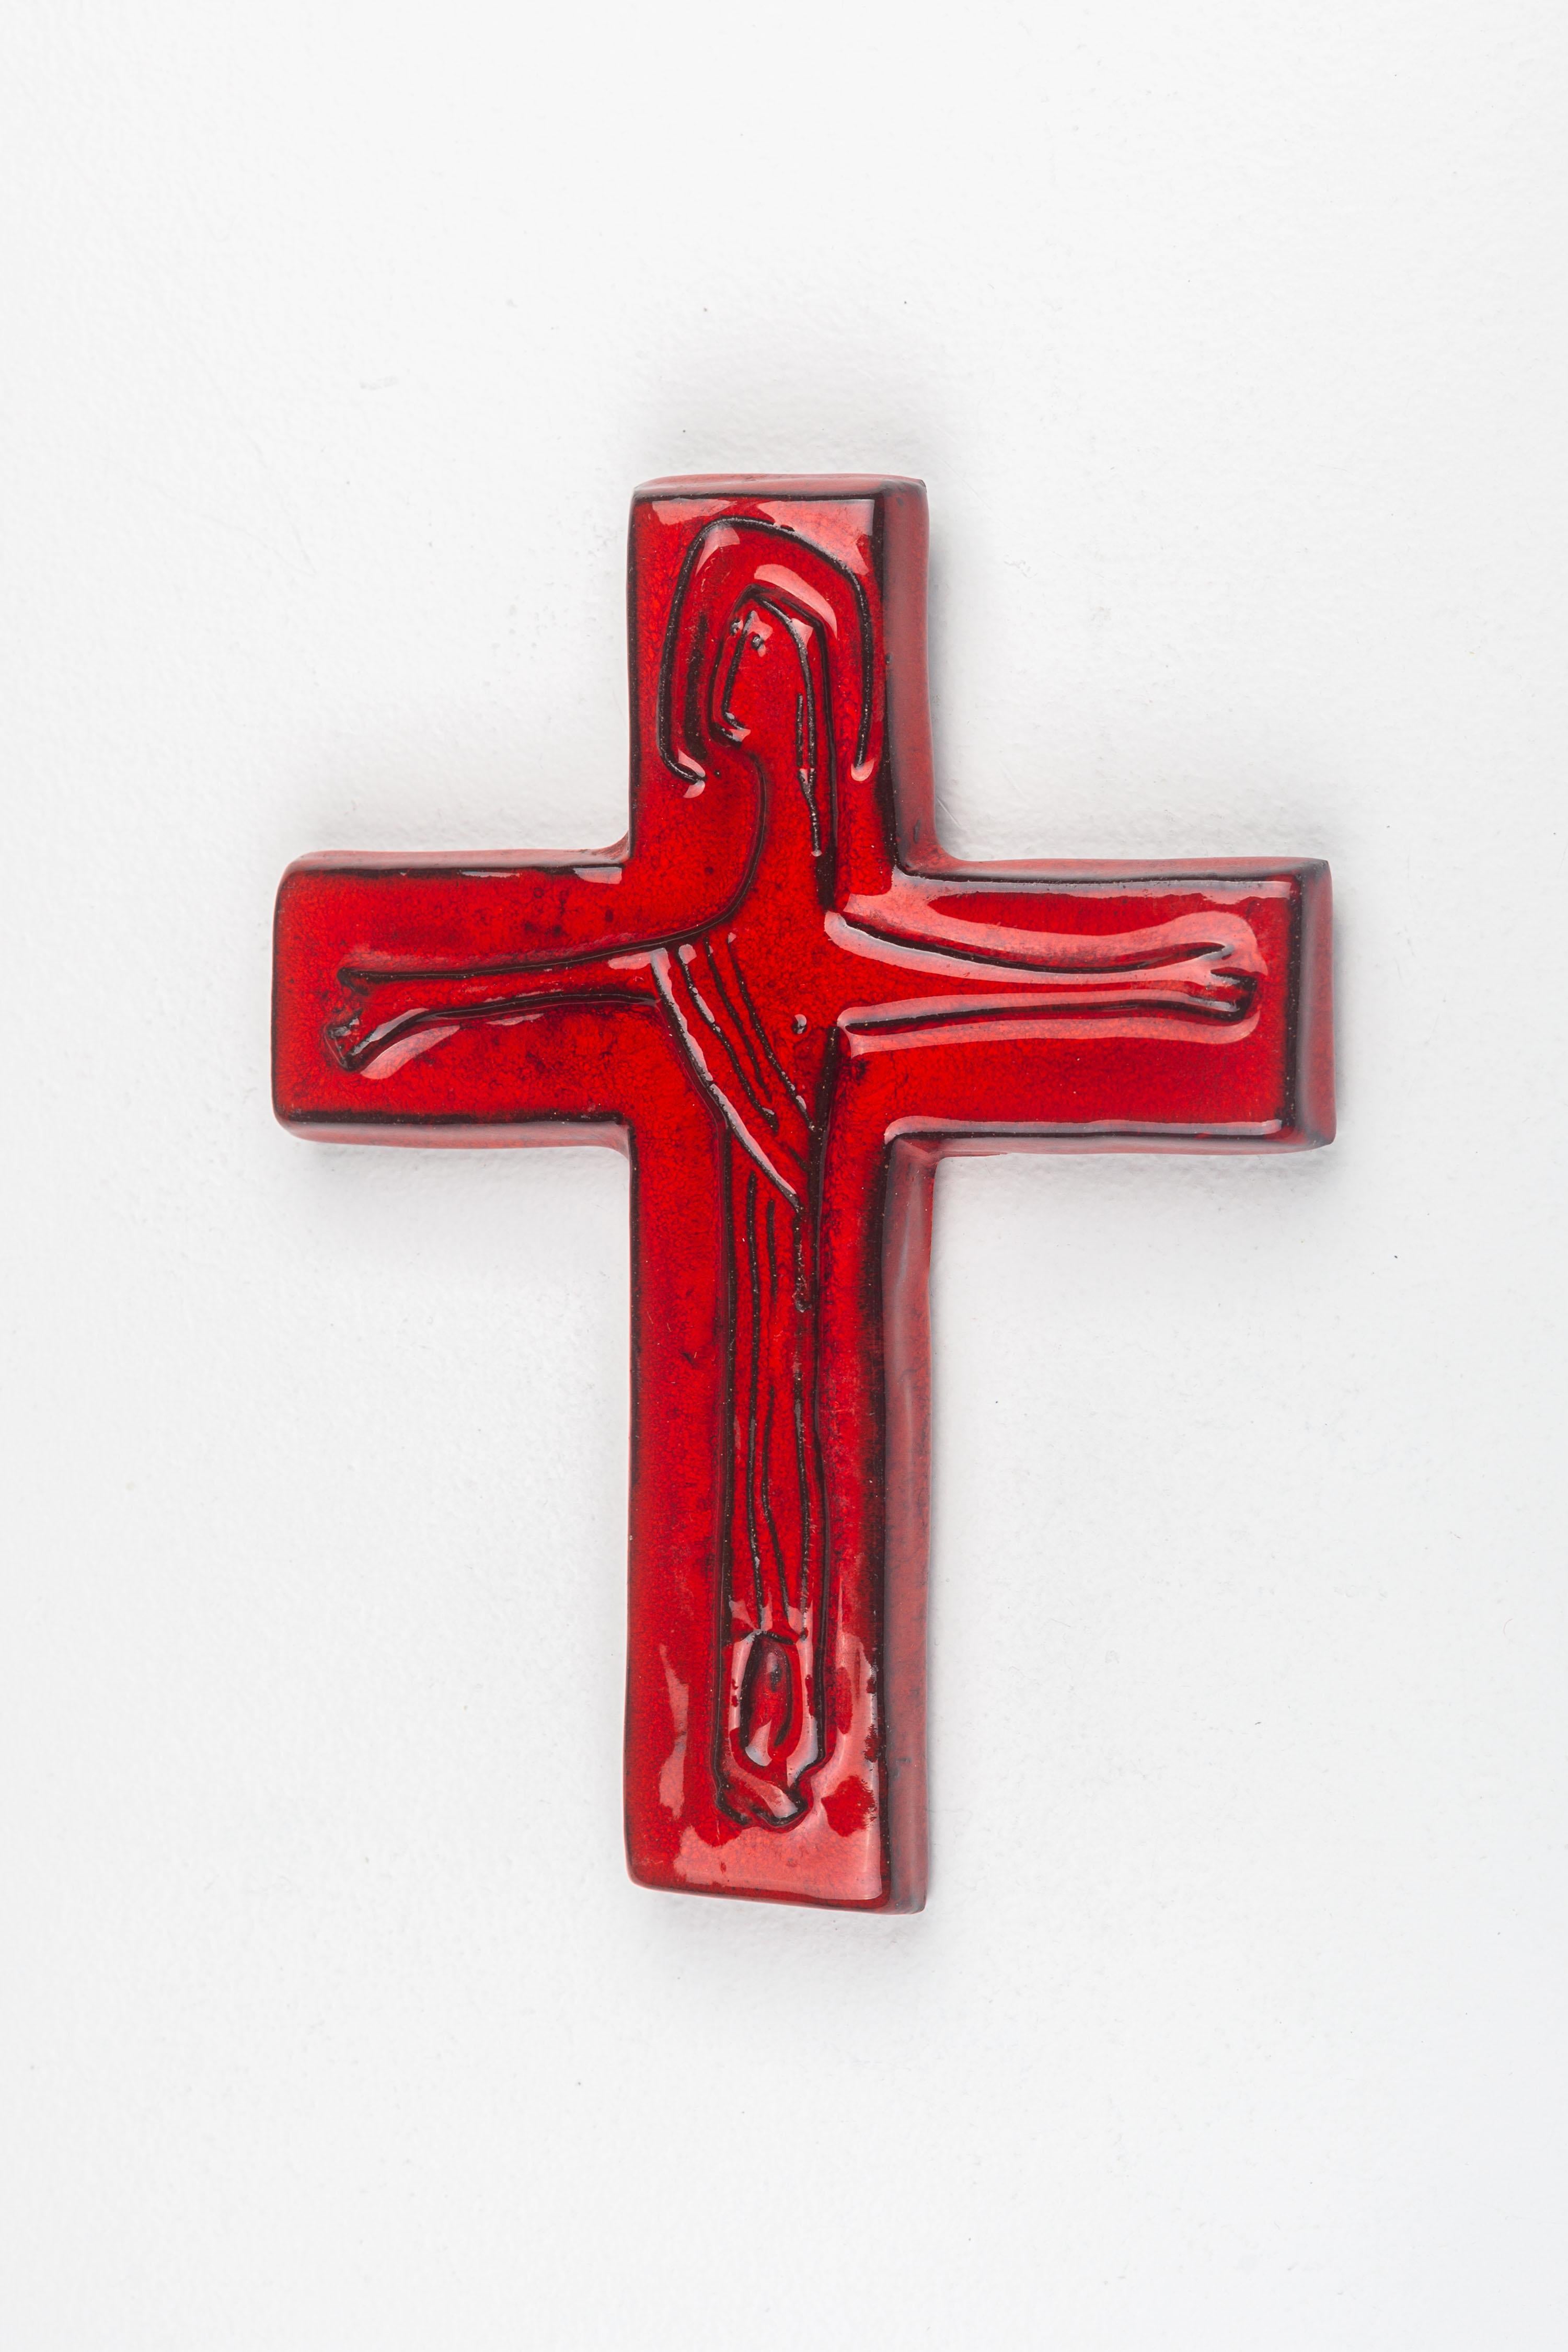 This mid-century modern ceramic crucifix, handcrafted by a European studio pottery artist, embodies the era's distinctive combination of traditional symbolism and modernist design. The piece features a vivid, glossy red glaze that covers the